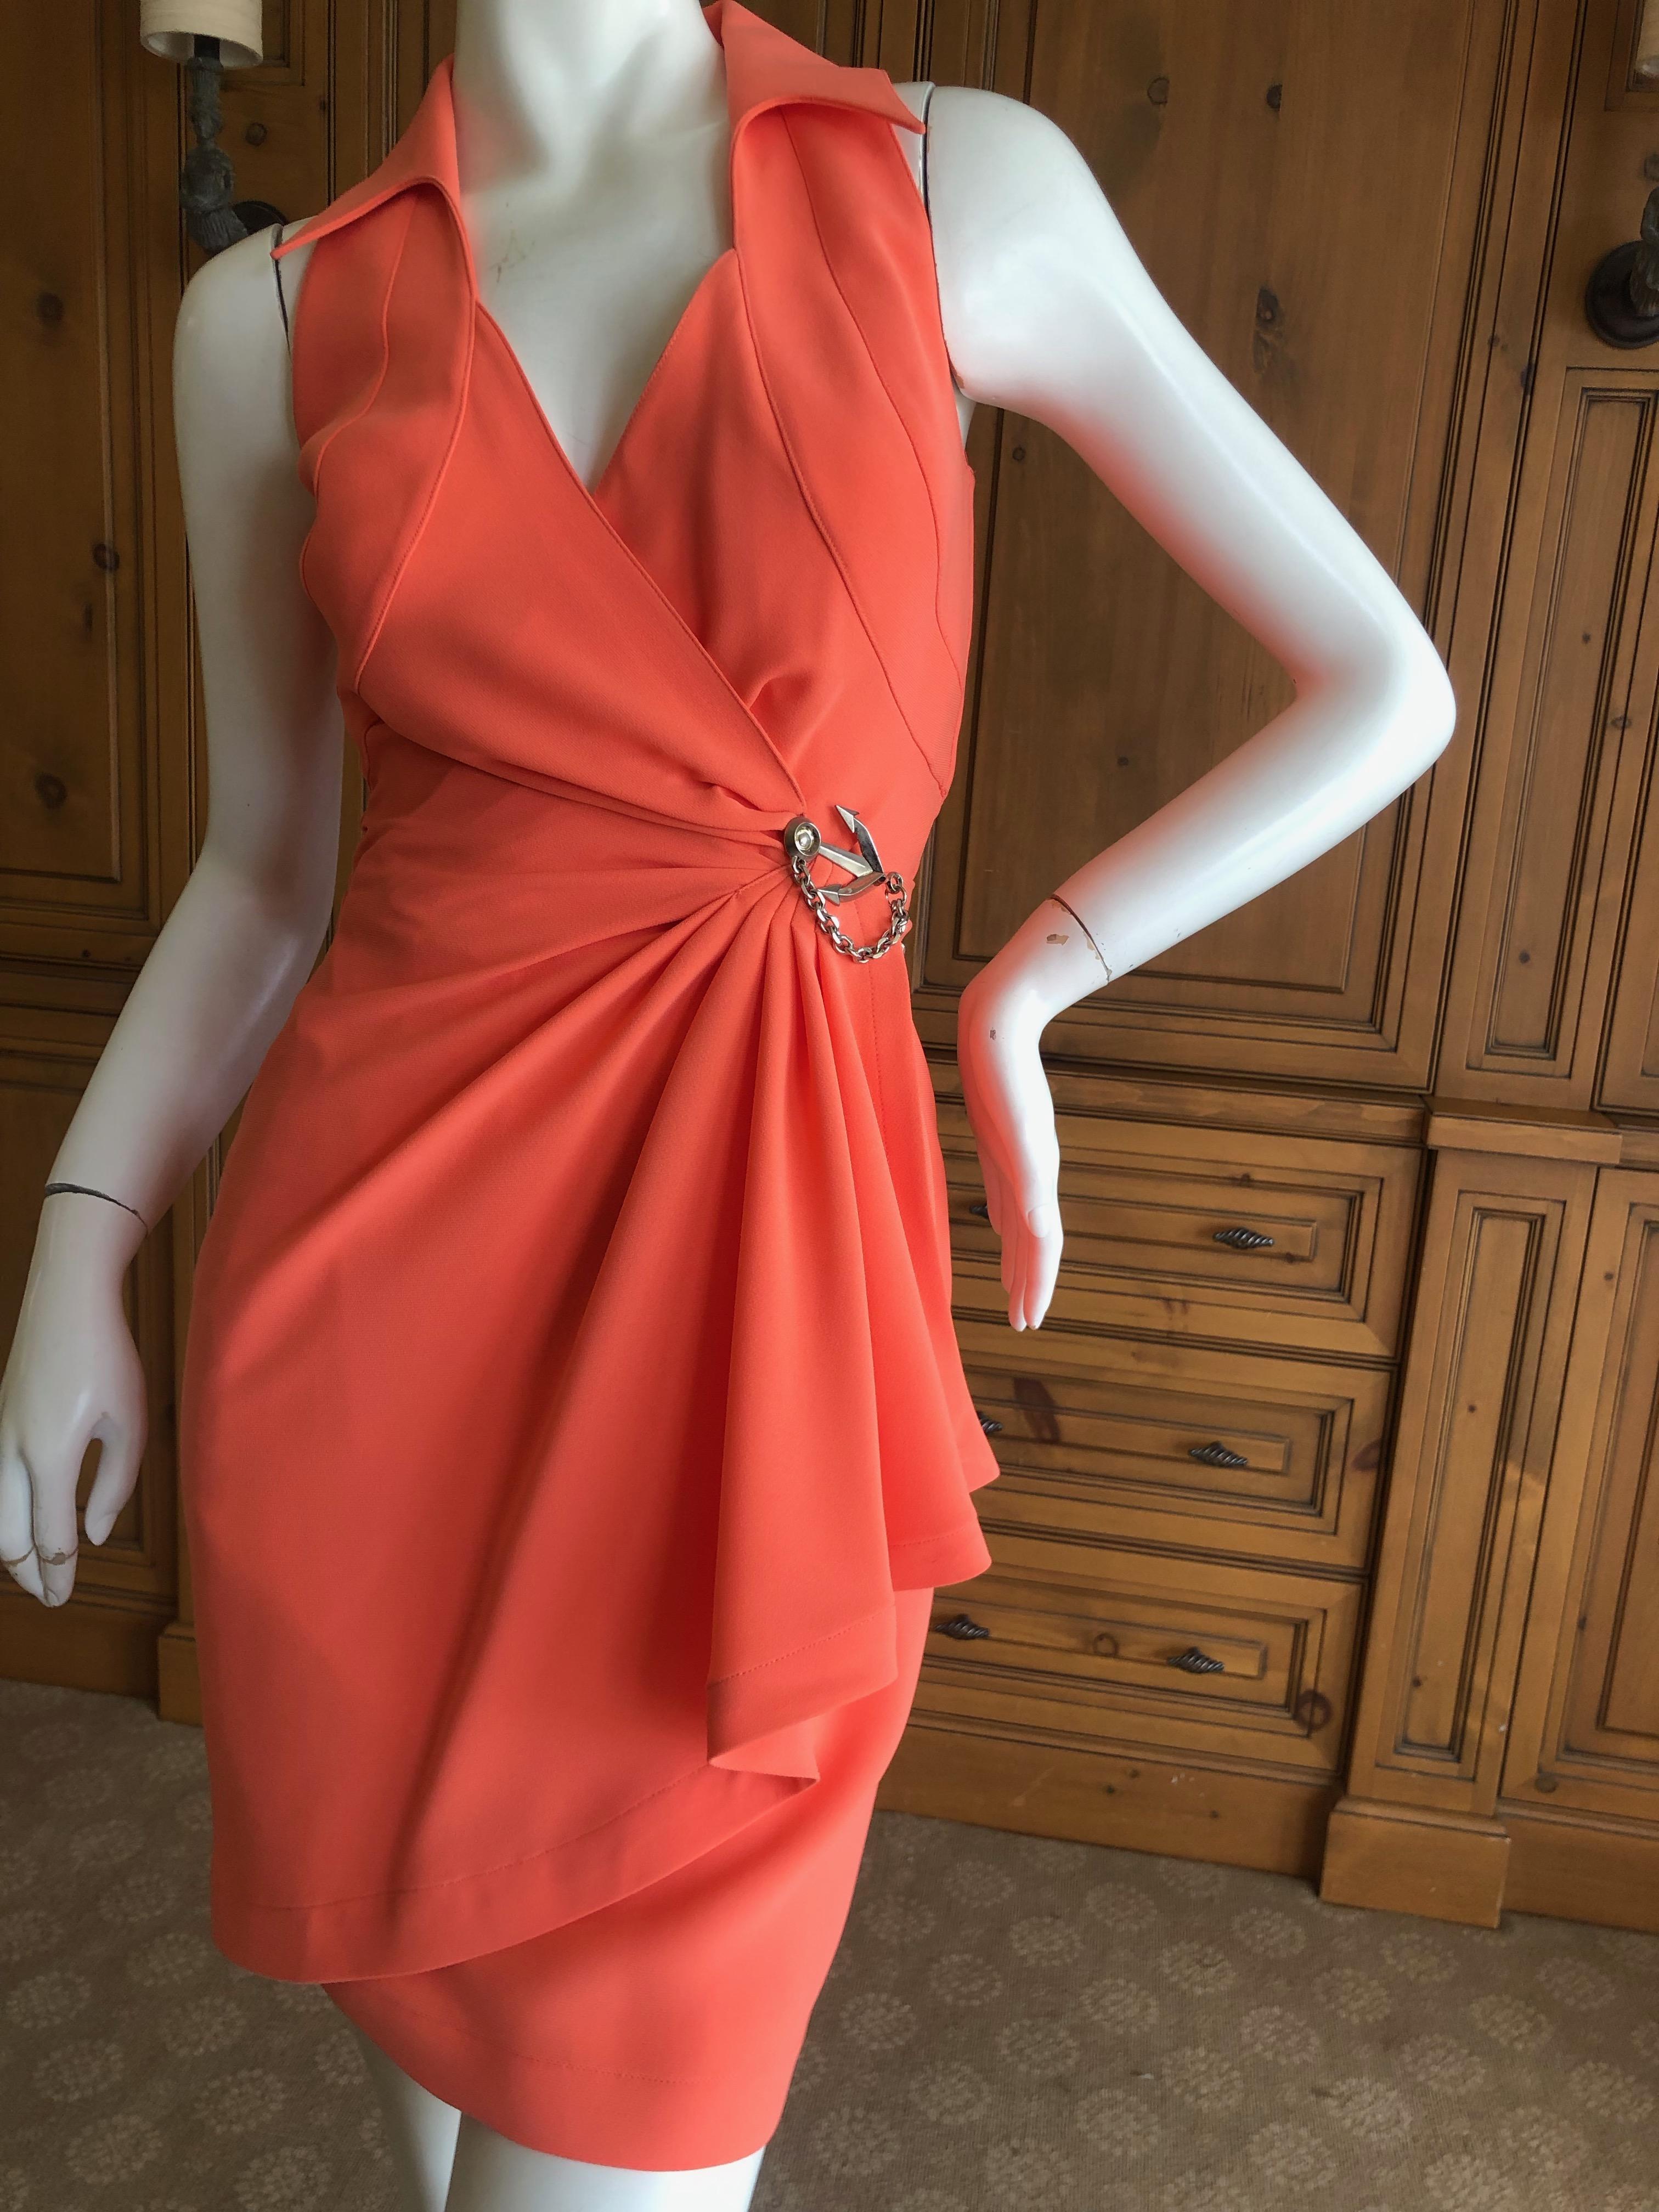 Thierry Mugler Vintage 1980's Coral Wrap Dress w Nautical Anchor Detail In Excellent Condition For Sale In Cloverdale, CA